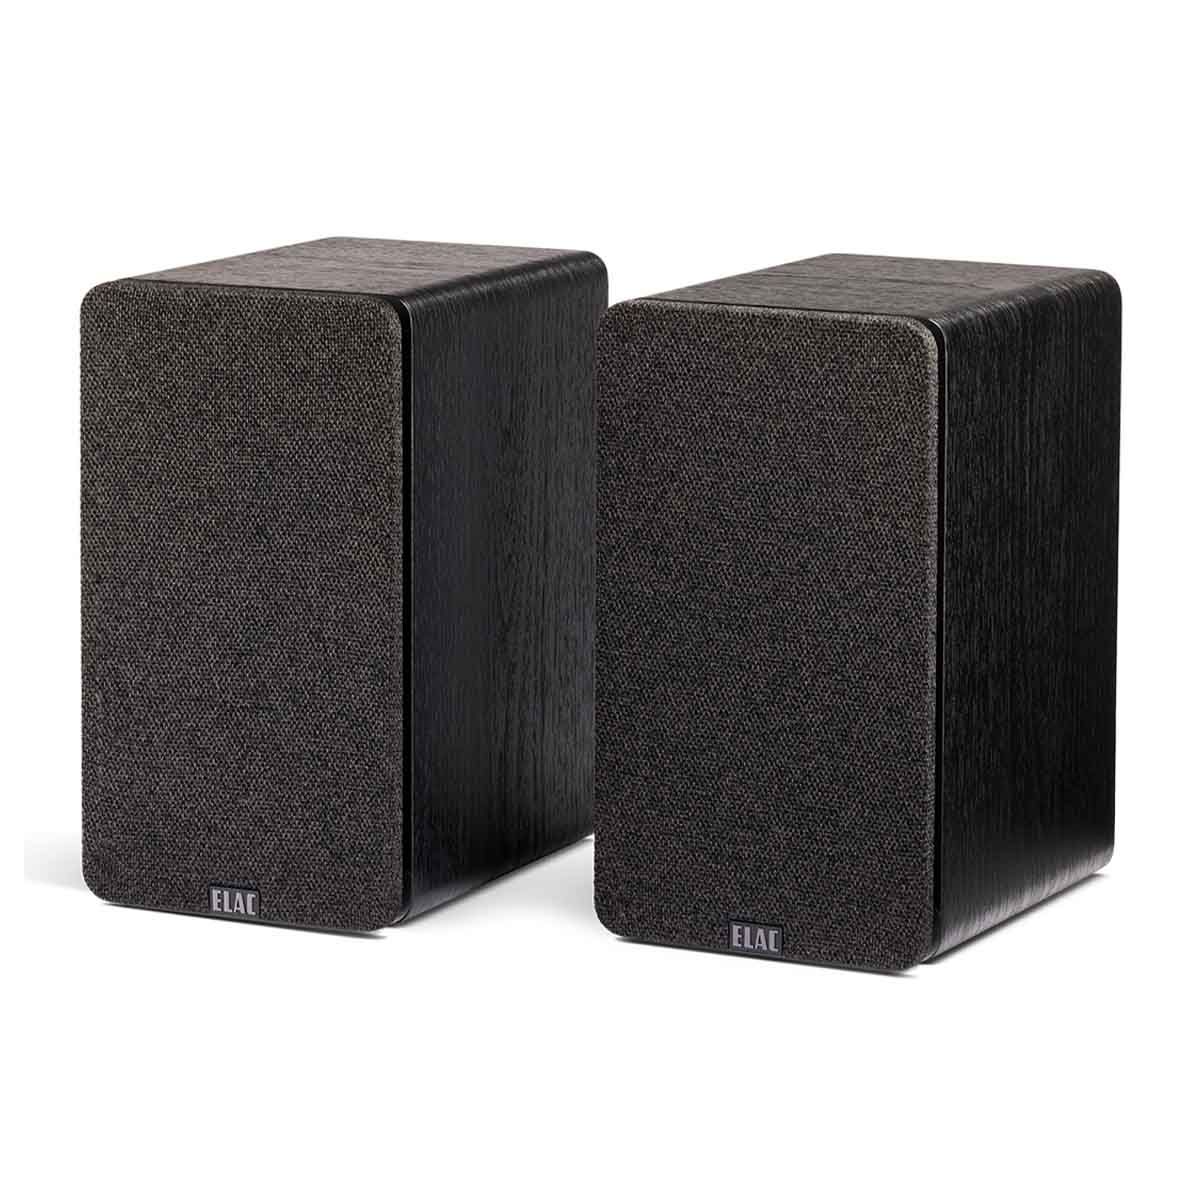 ELAC Debut ConneX DCB41 Powered Monitor Speakers - Black Ash Pair with grille - angled front view